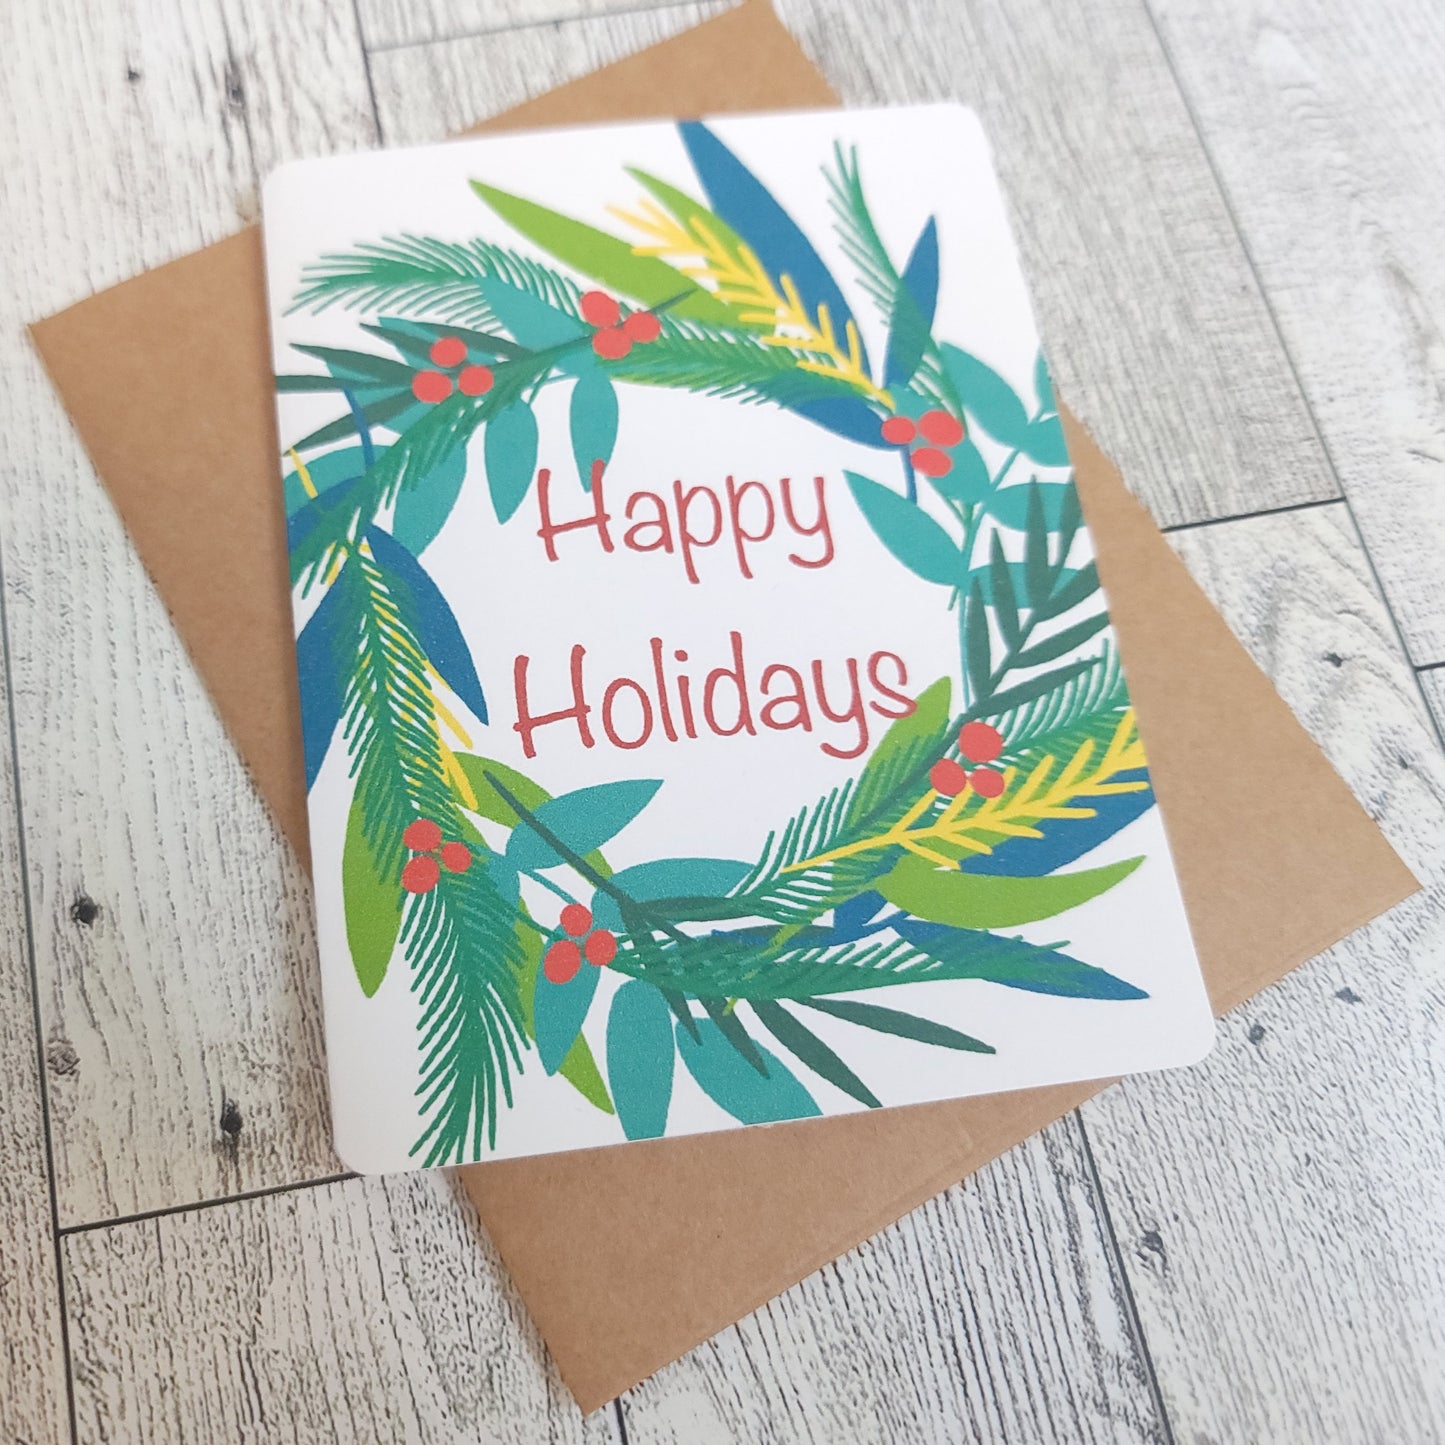 Happy Holidays Wreath Handmade Greeting Card - Recycled Paper and Kraft Envelop - Angled Overhead Shot